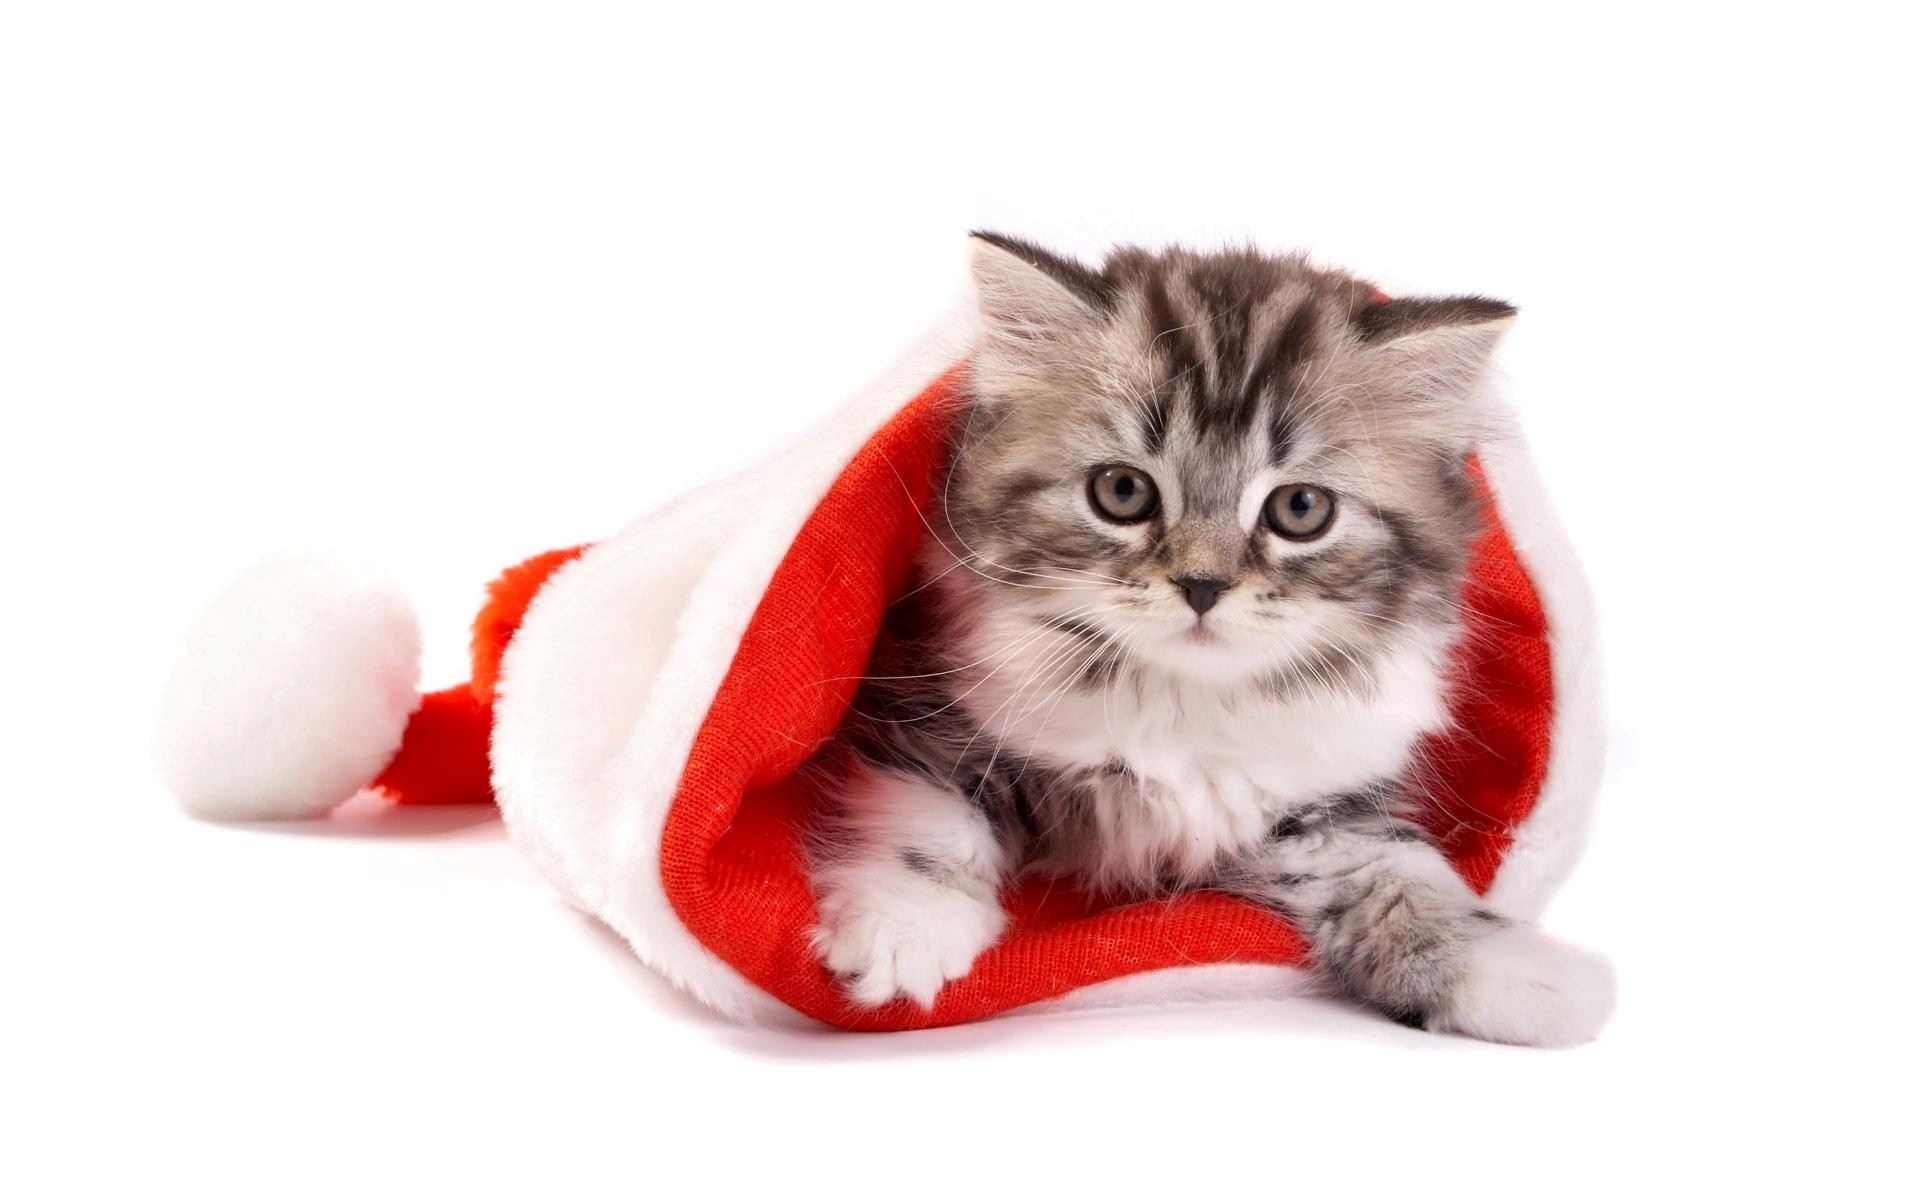  christmas downloads 644 tags christmas cat holiday festival wide views